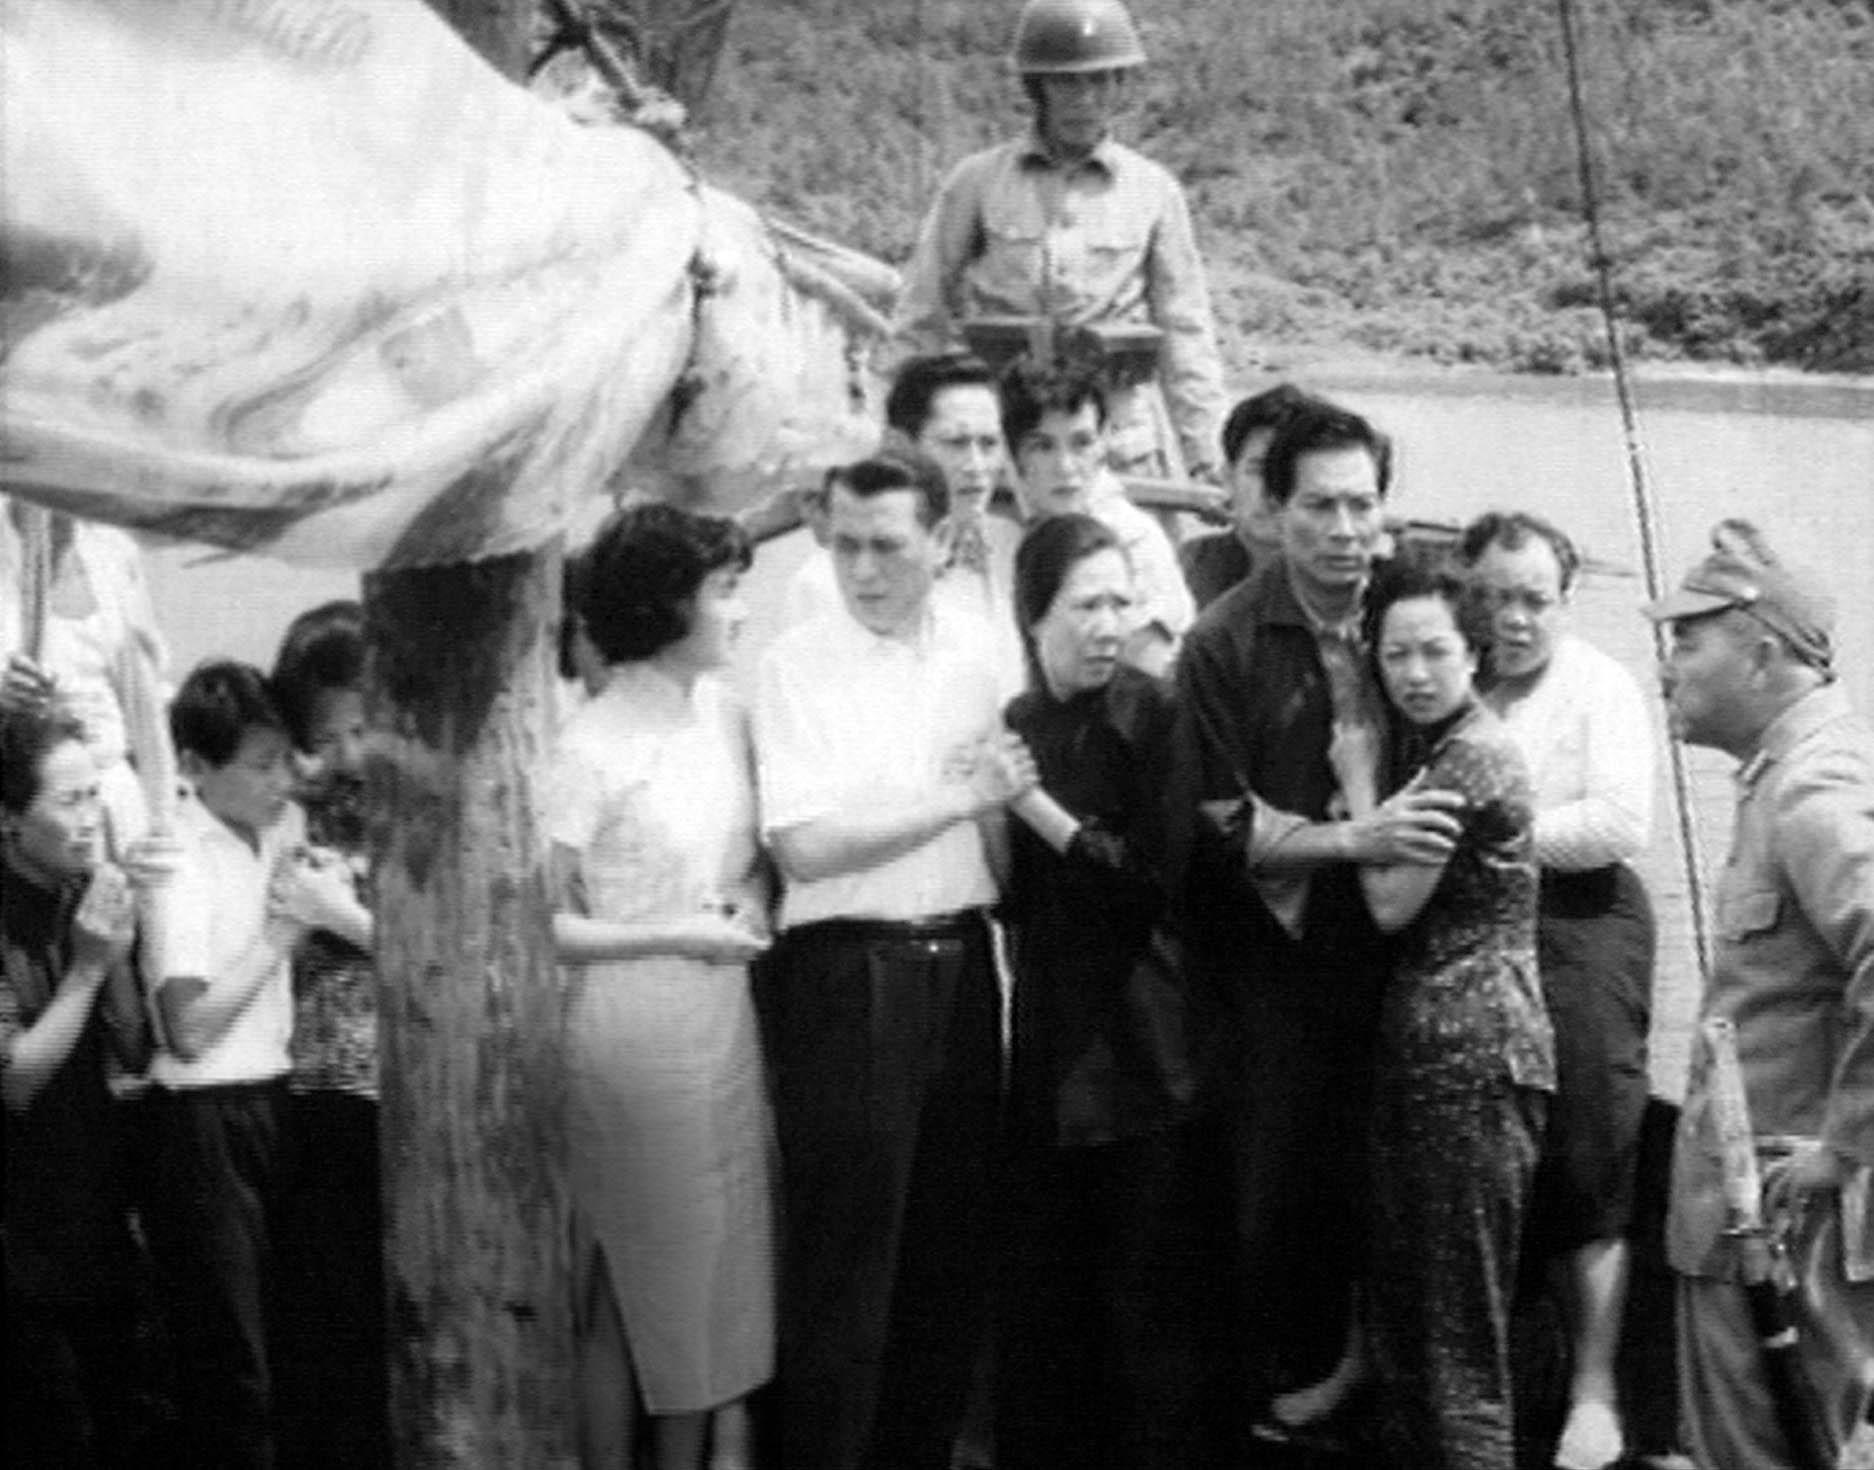 The Hong Kong Film Archive of the Leisure and Cultural Services Department will present a special programme, Cine Memories of the War of National Resistance, on September 3 (Sunday) with a free screening of the film "Sea" (1963). Photo shows a film still of "Sea".